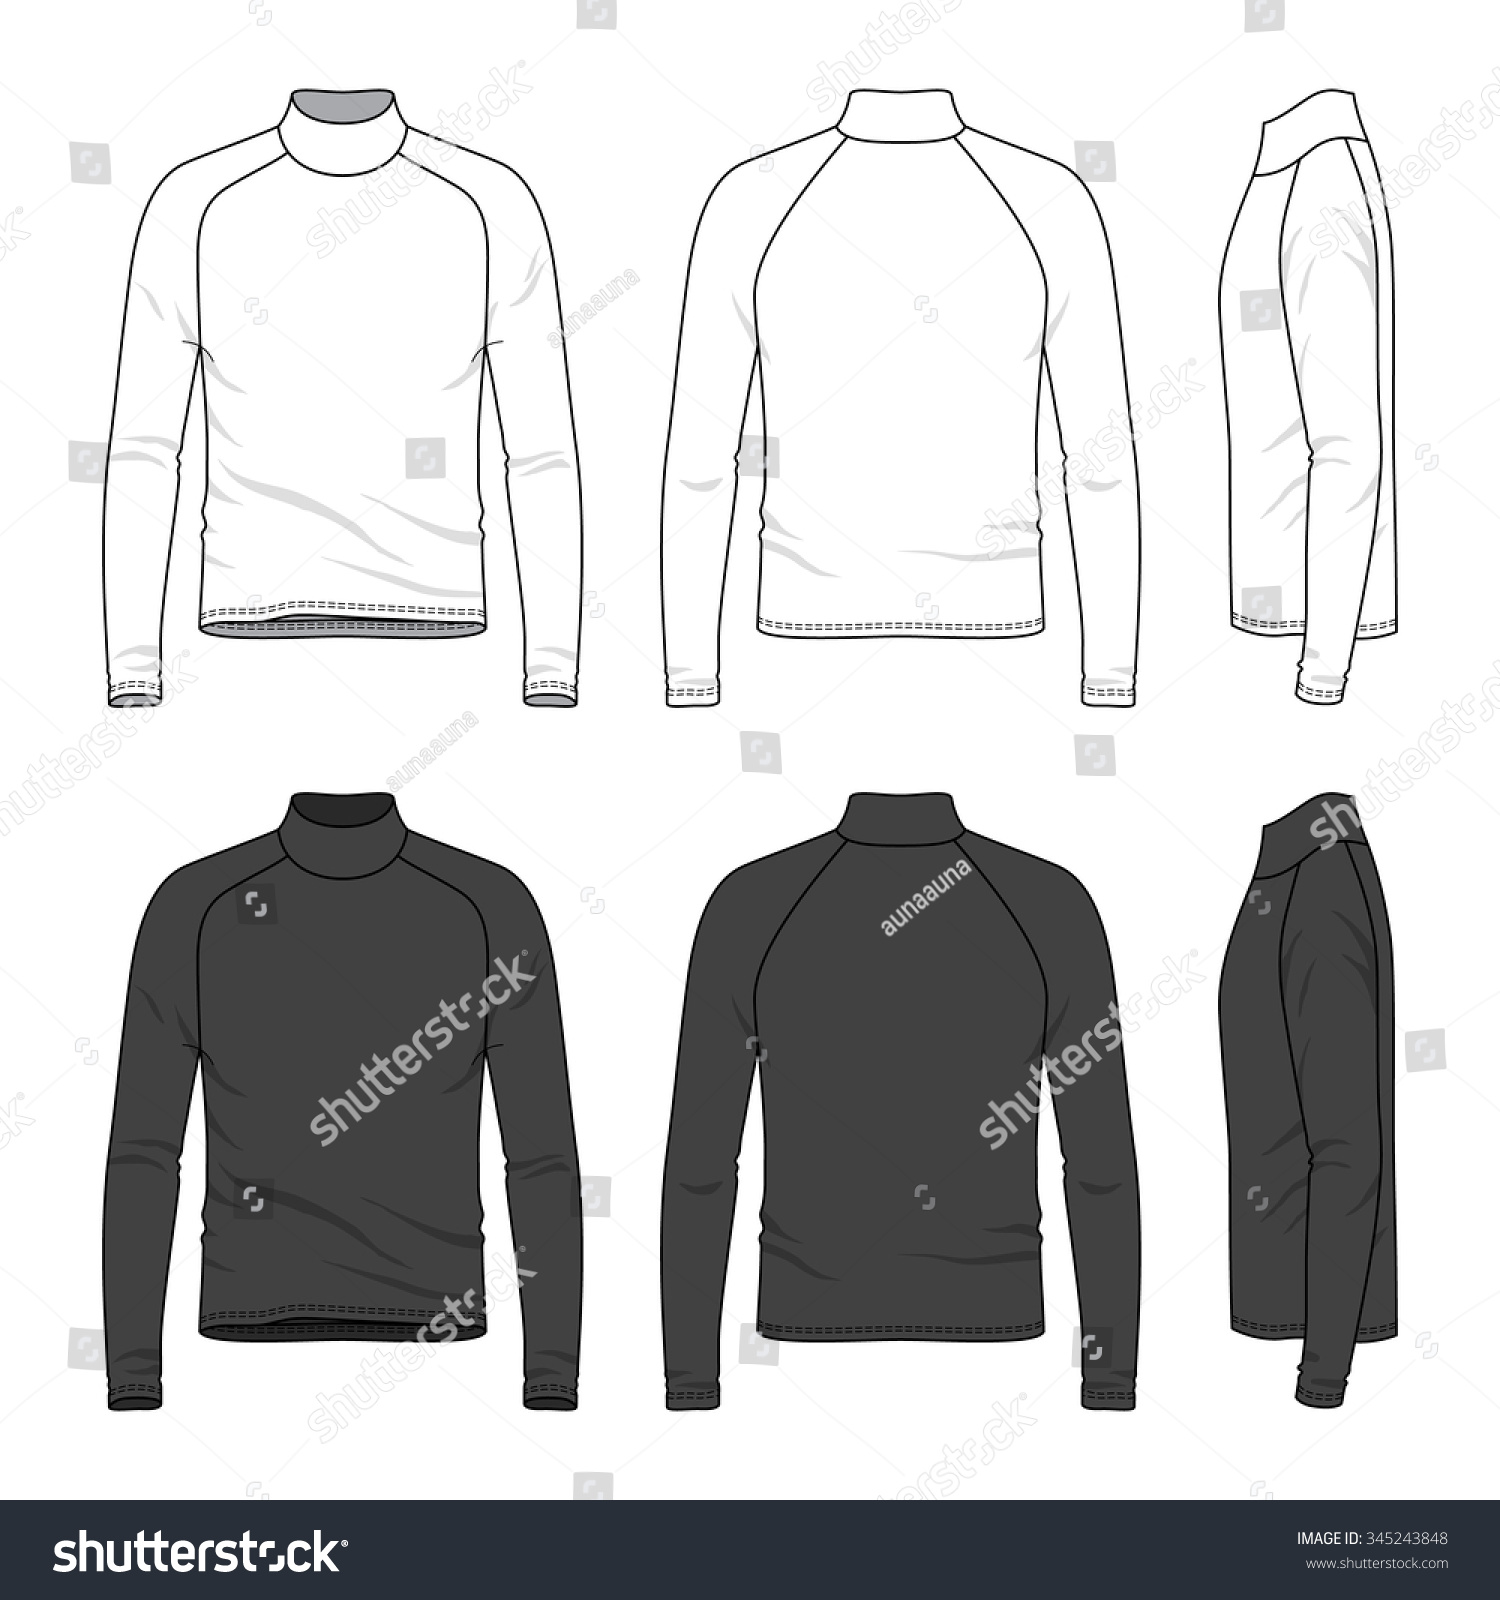 Mens Clothing Set White Black Colors Stock Vector (Royalty Free ...